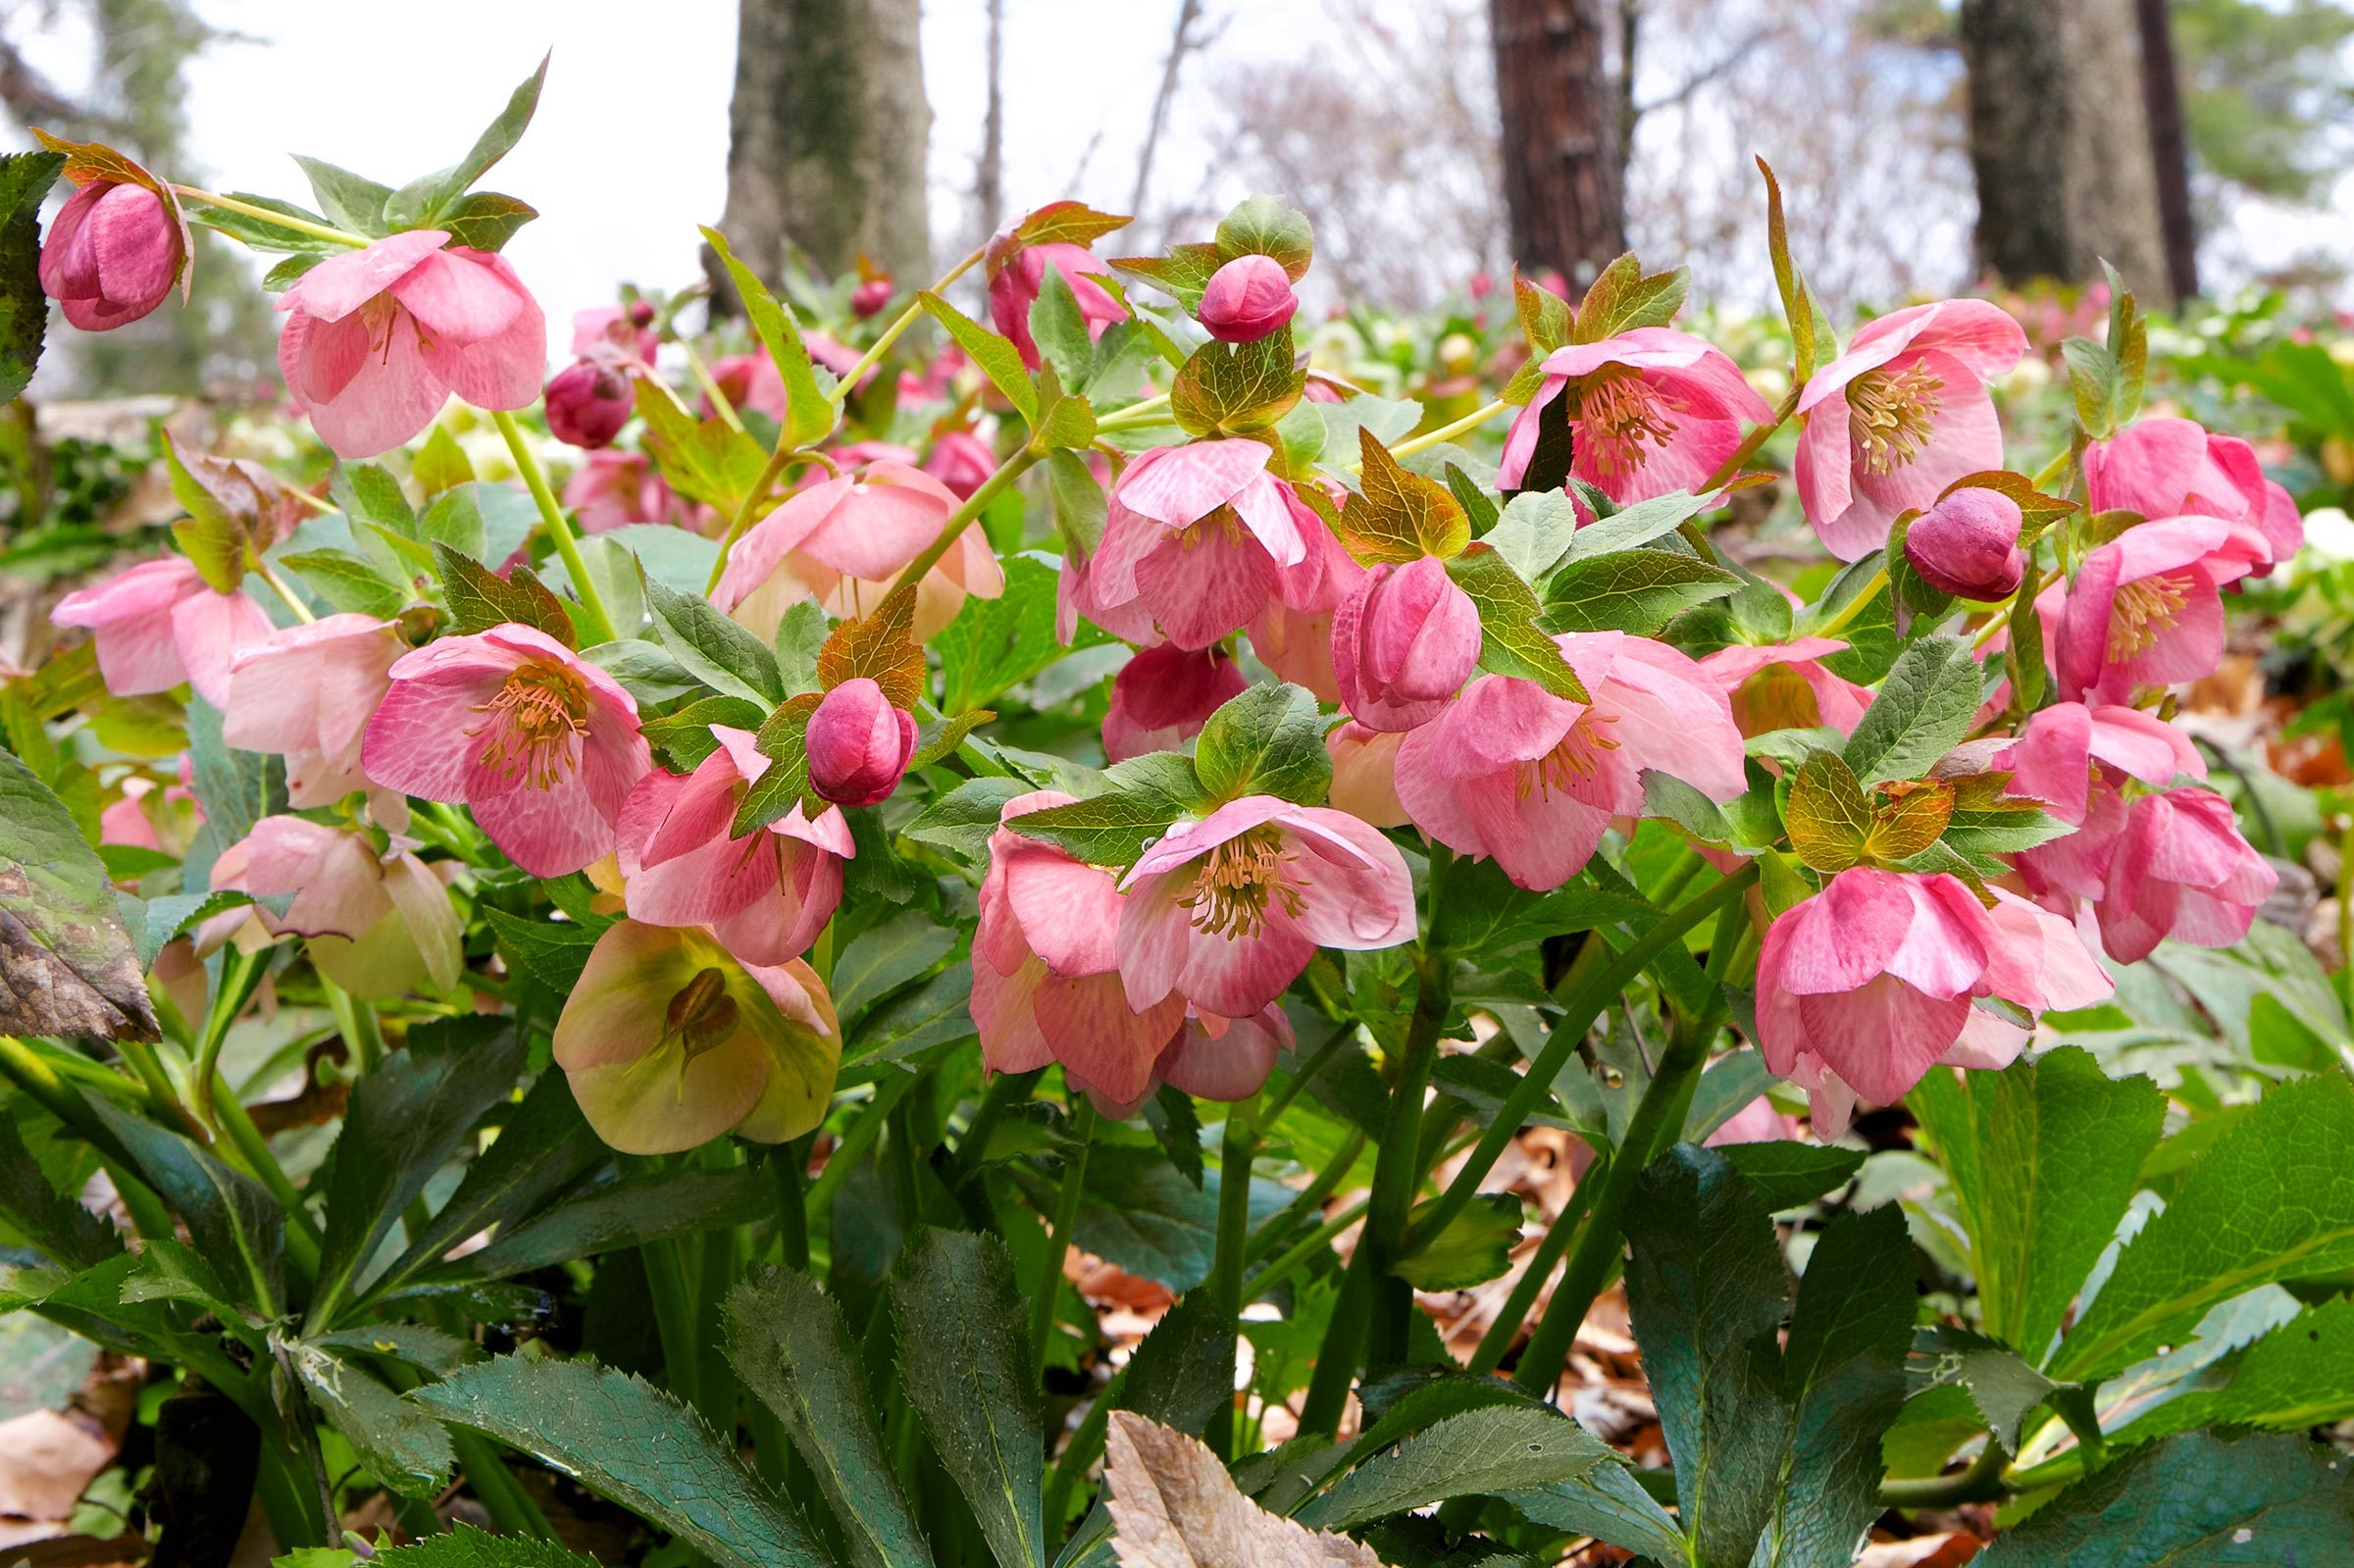 Hellebores flowers in the forest